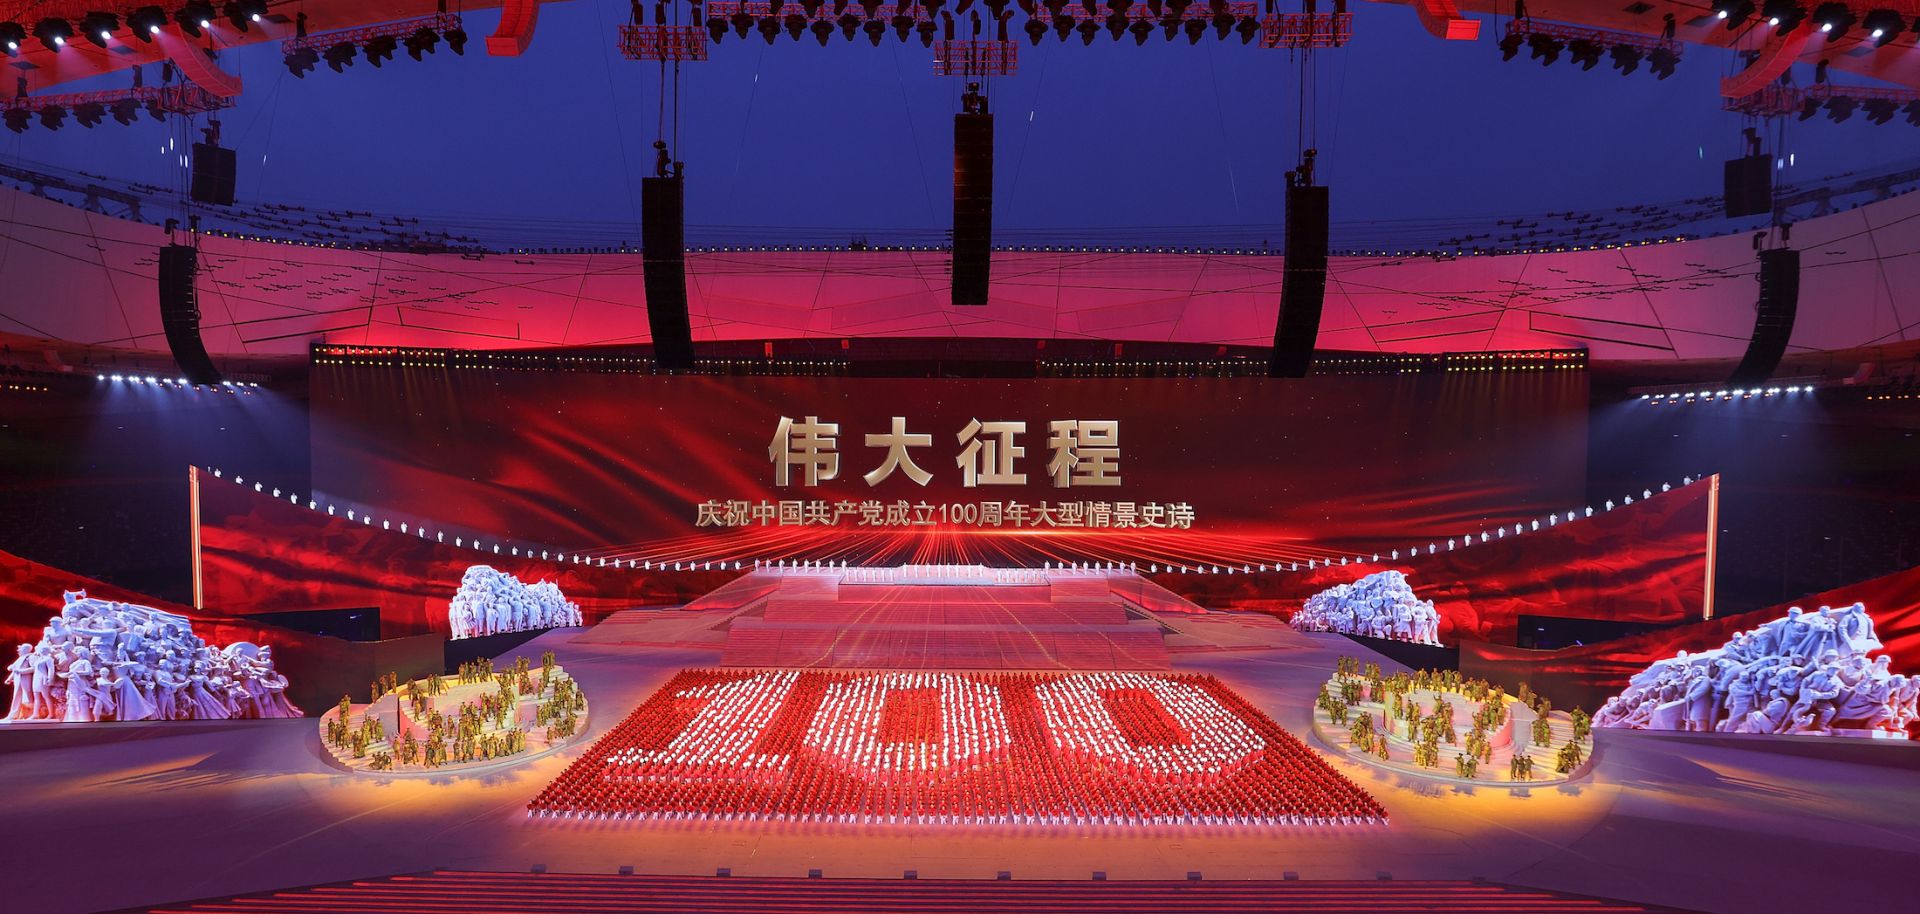 Actors perform in celebration of the 100th anniversary of the founding of the Communist Party of China on June 28, 2021, in Beijing.